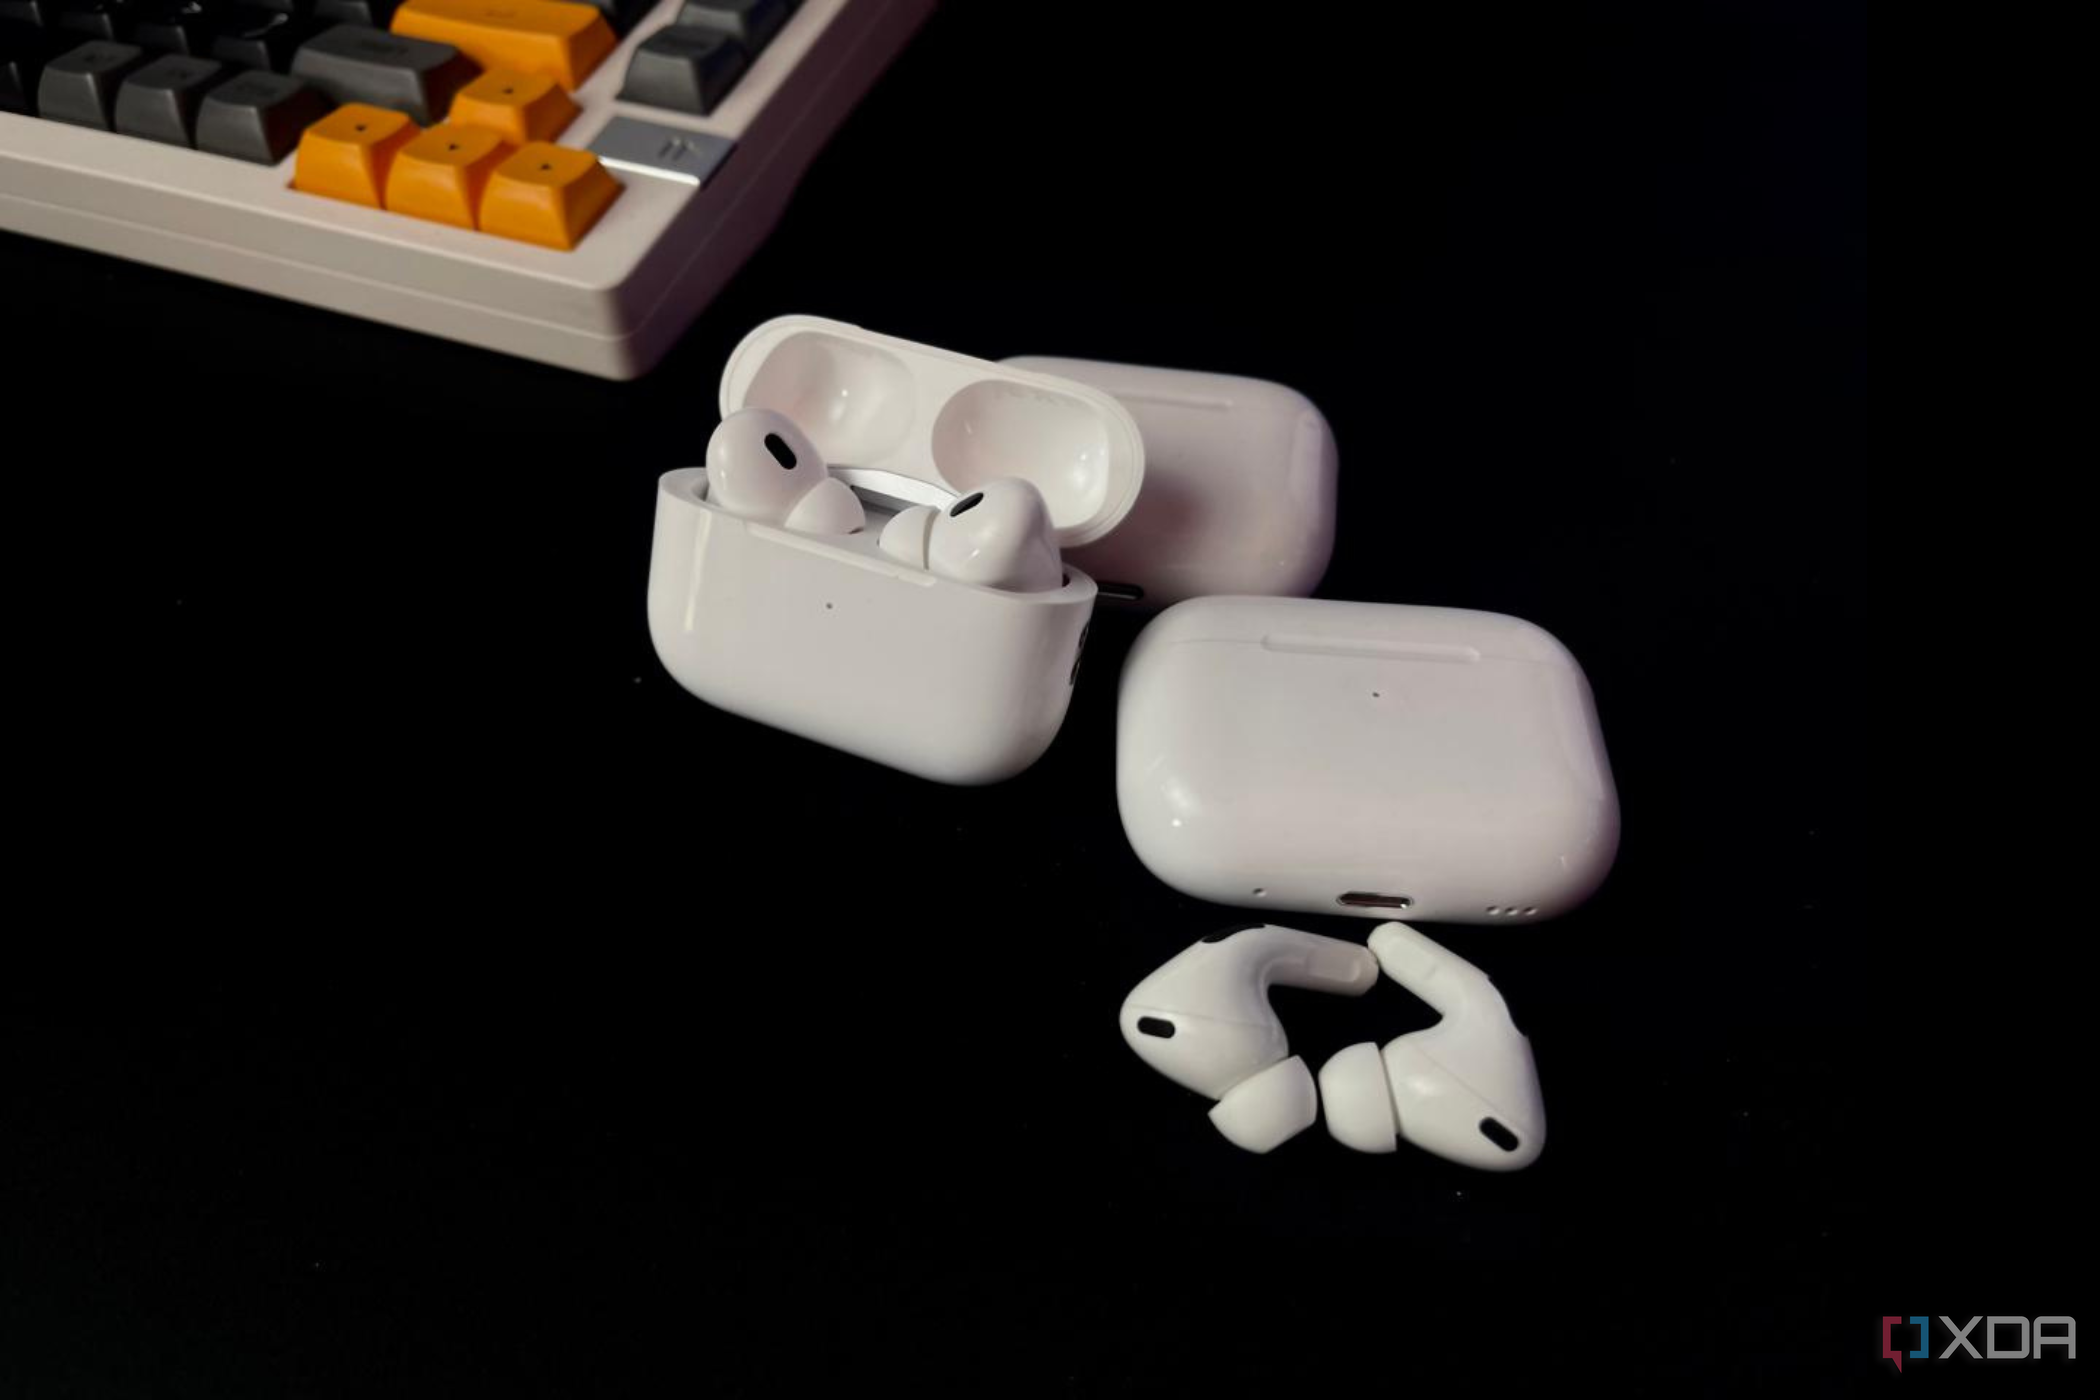 Image of a pair of AirPods Pro with an open charging case on a black background next to a Zuoya LMK81 mechanical keyboard.